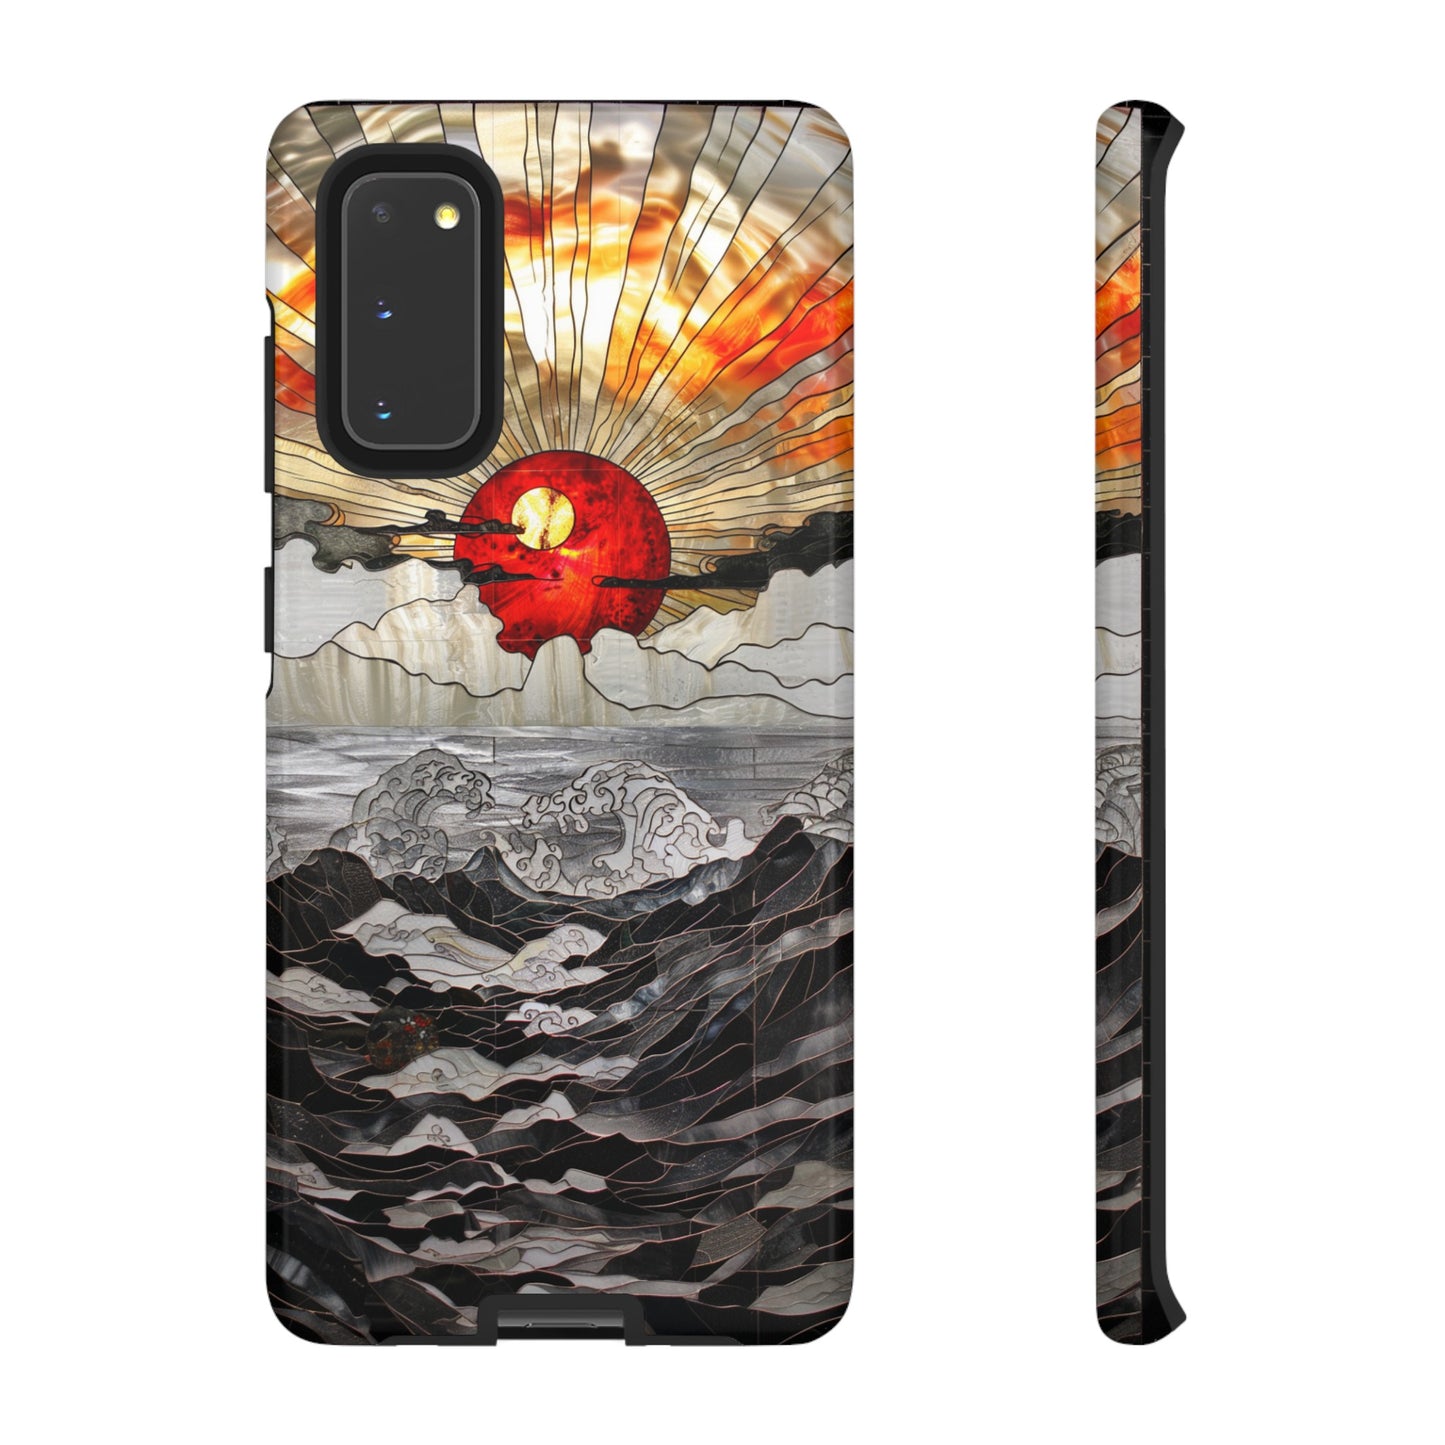 Rising sun and ocean wave phone case for iPhone 11 case